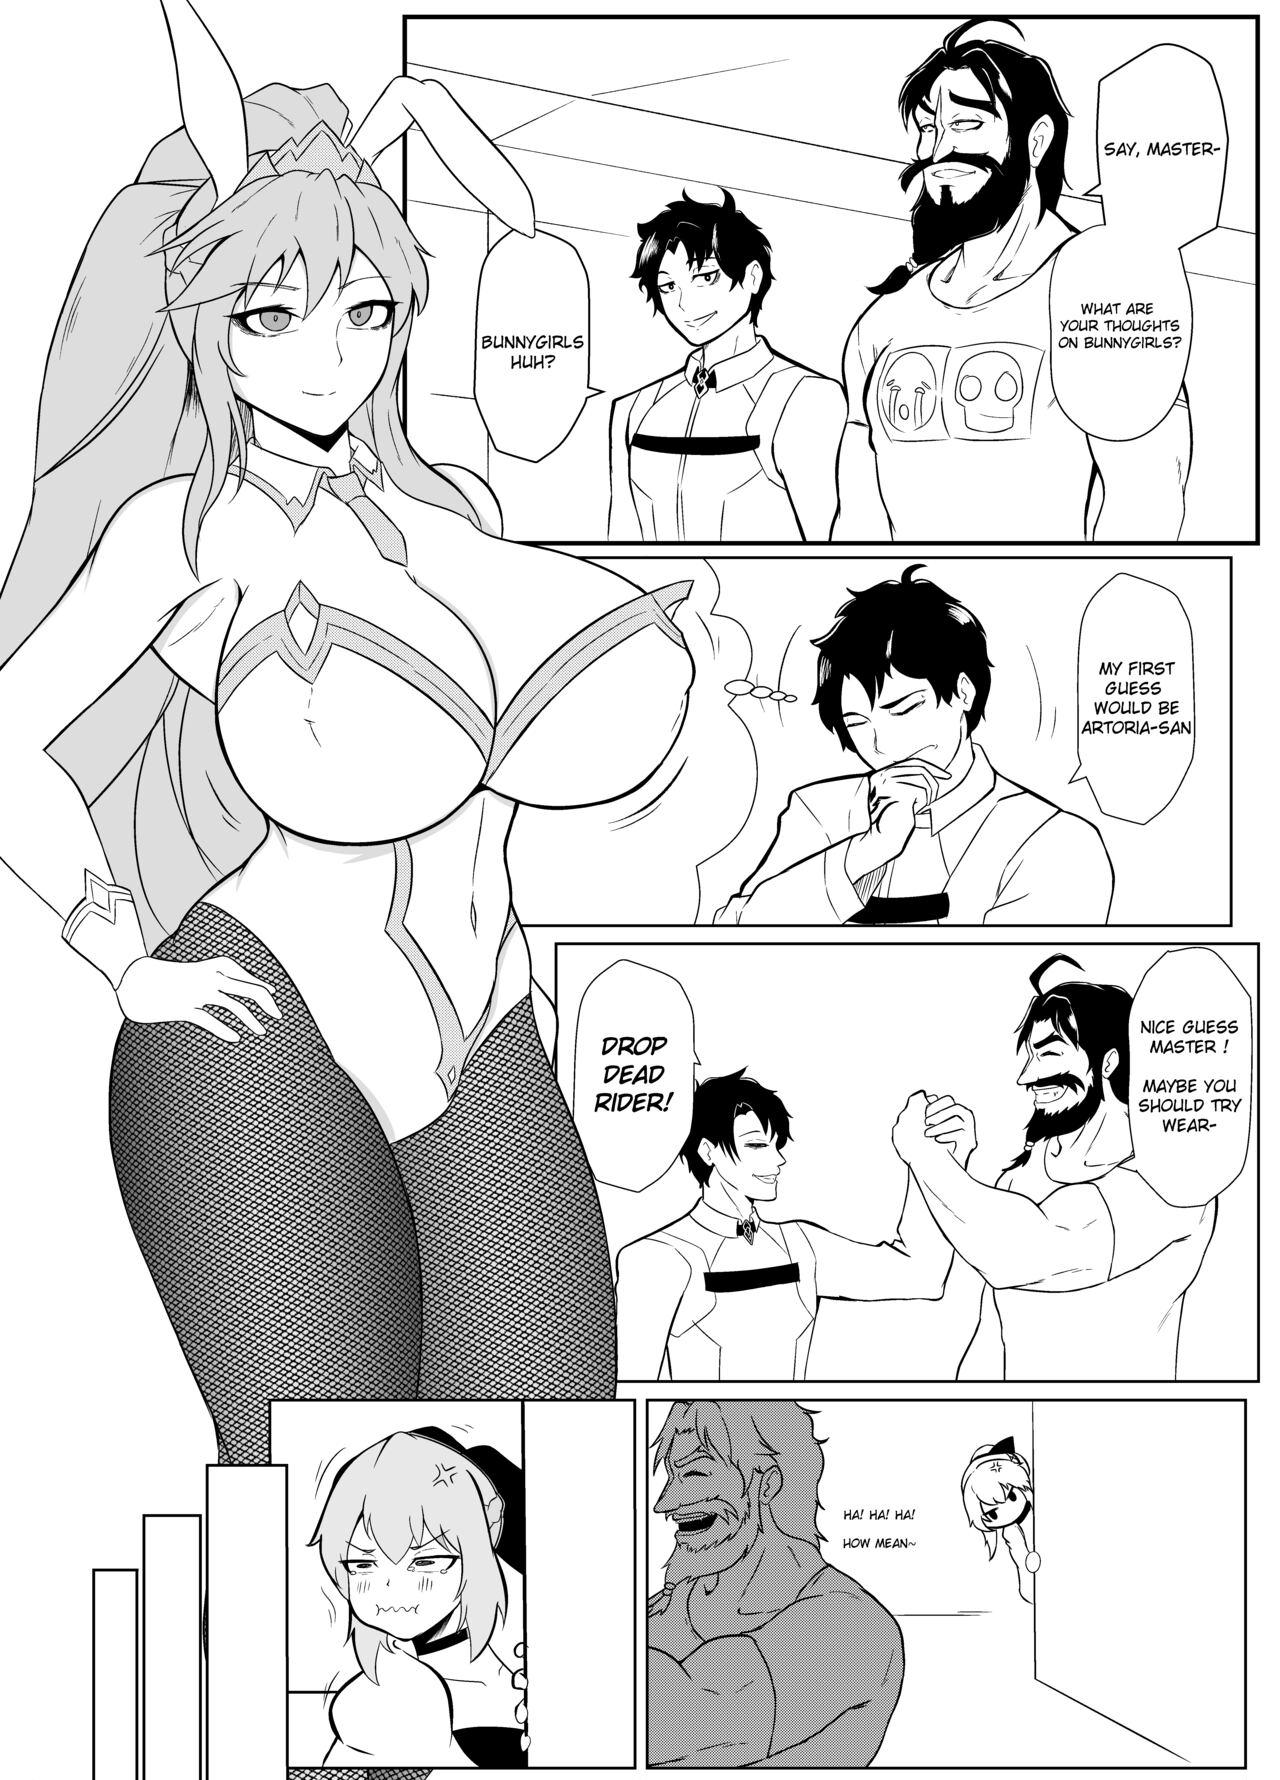 Body Massage うさぎの年 - Fate grand order Gay Hairy - Page 1